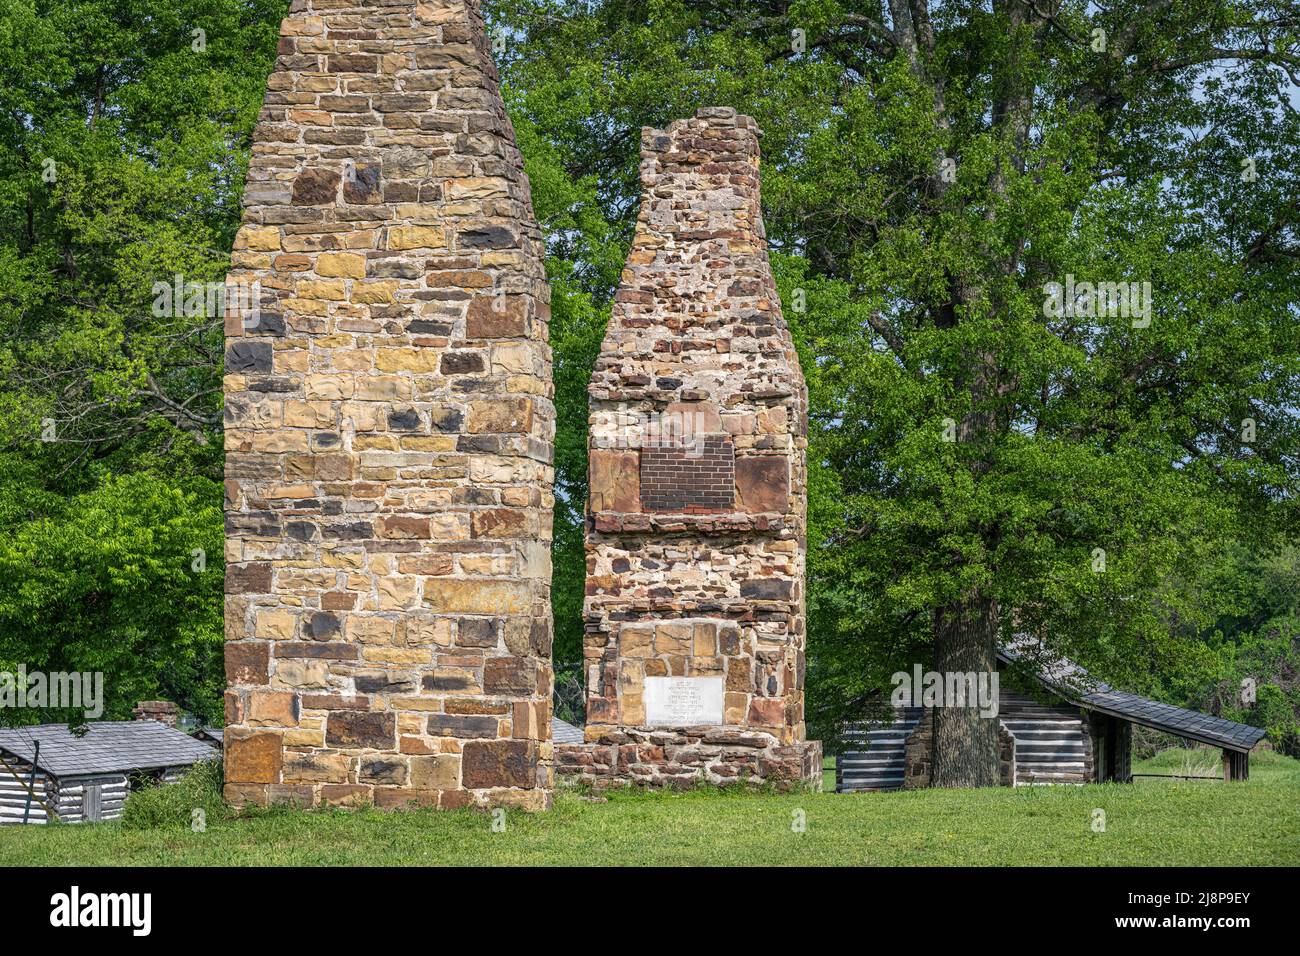 Stone chimneys from the site of the Adjutants's Office, occupied by Jefferson Davis from 1833-1835, at Fort Gibson Stockade in Fort Gibson, Oklahoma. Stock Photo